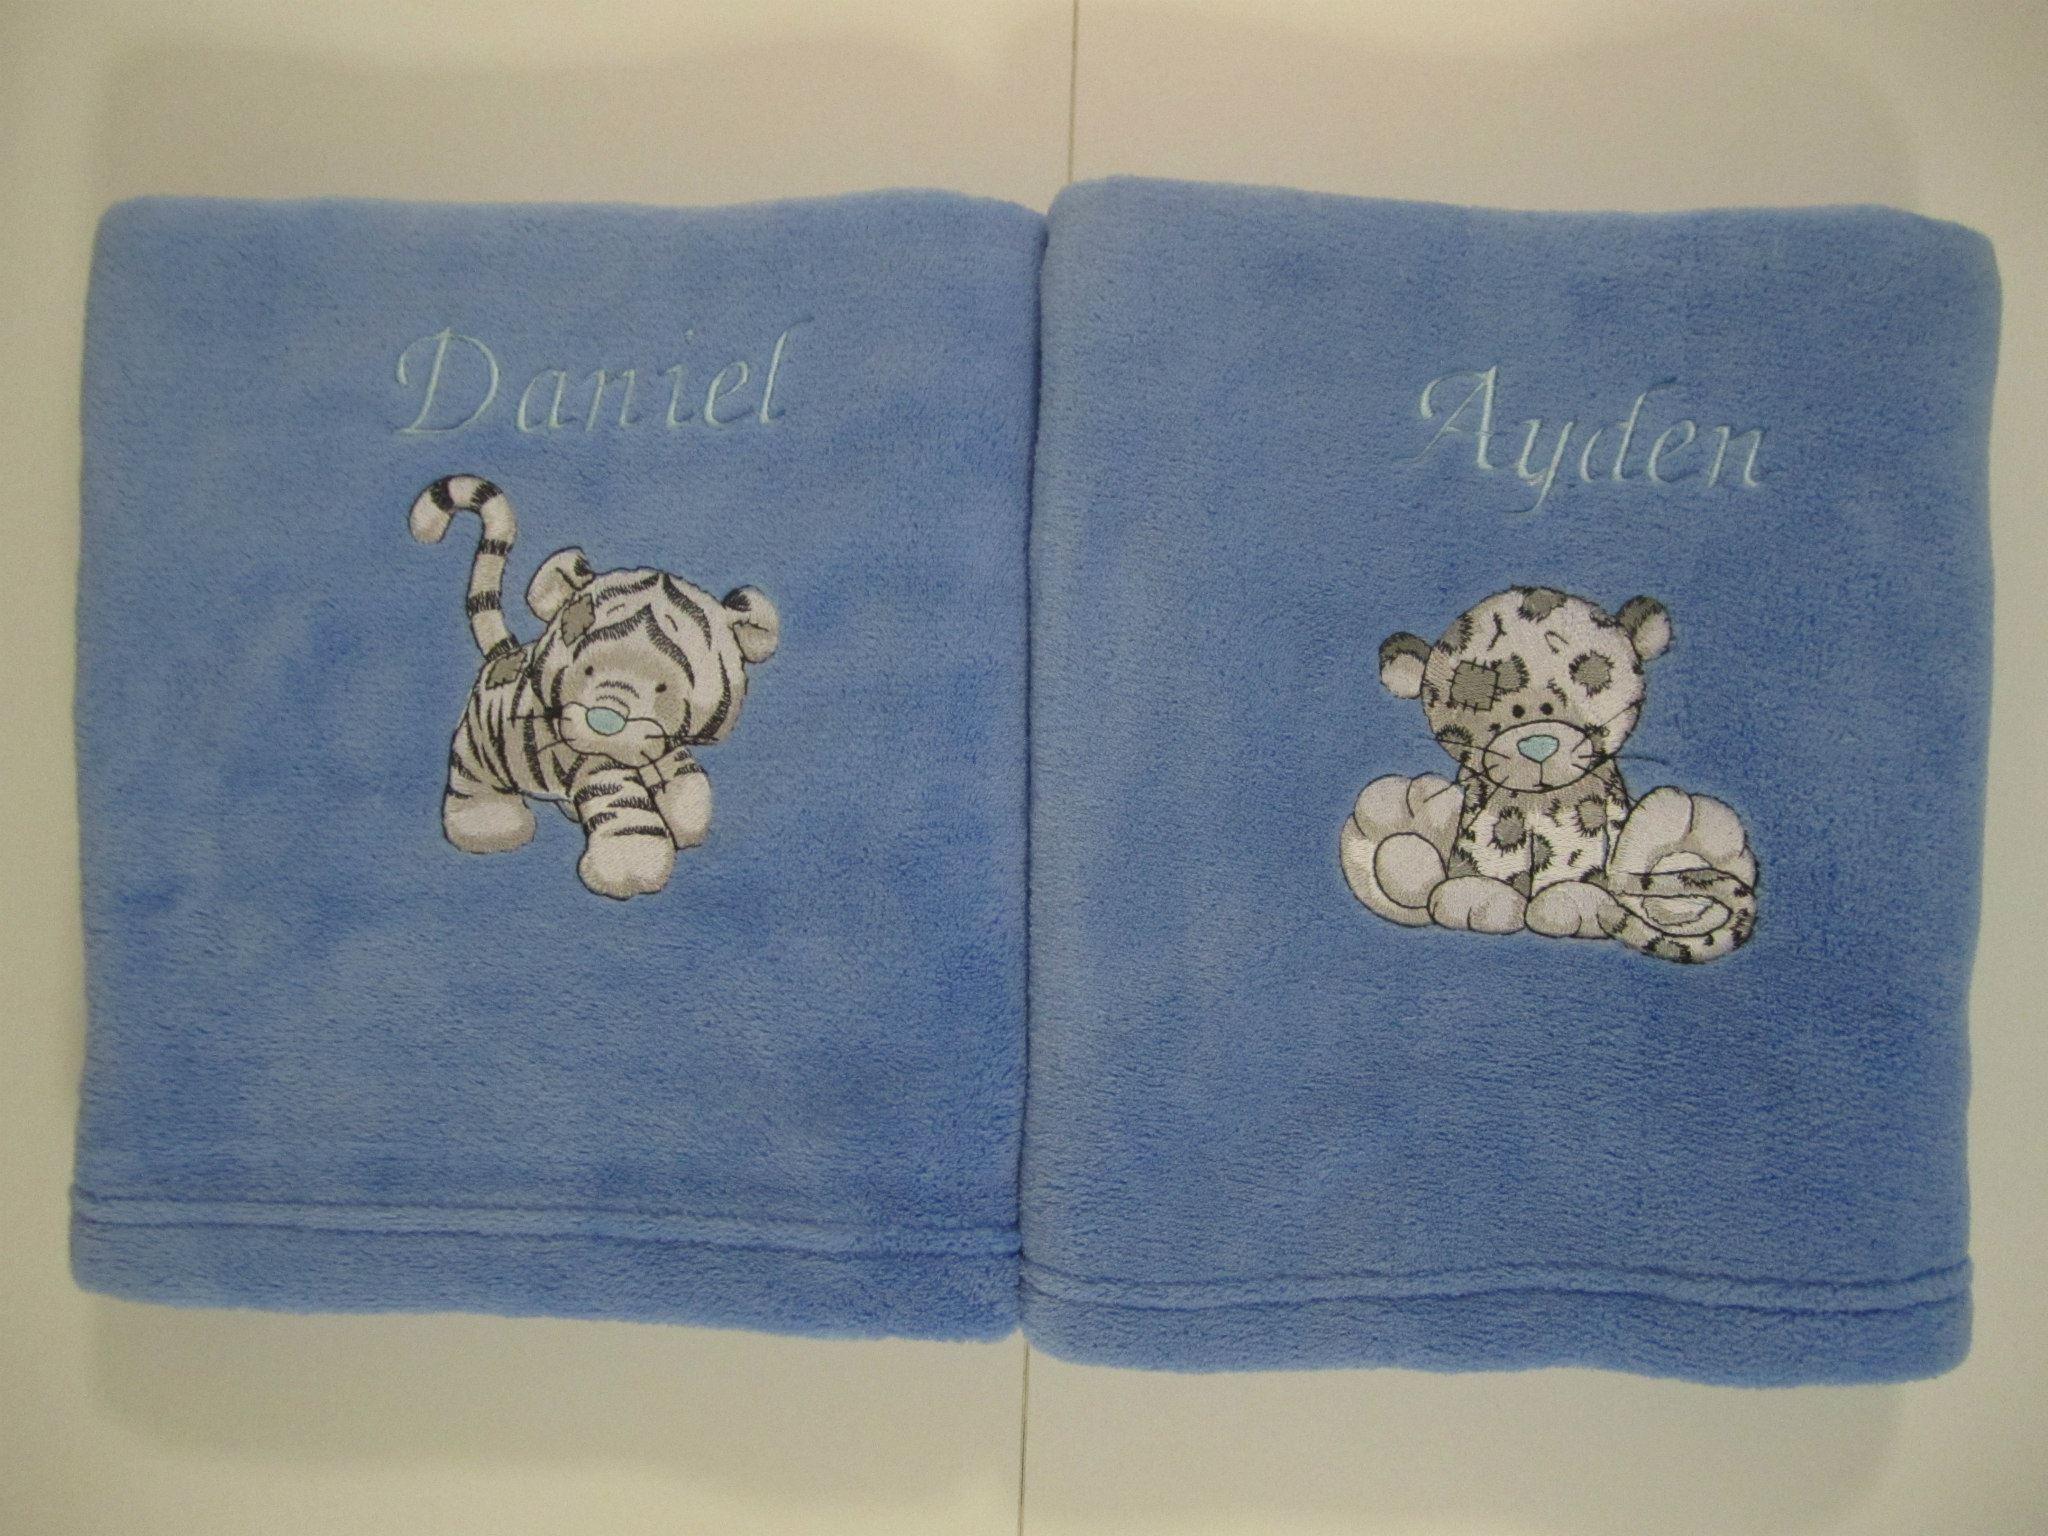 Towel with Leo and Bengal tiger embroidery designs